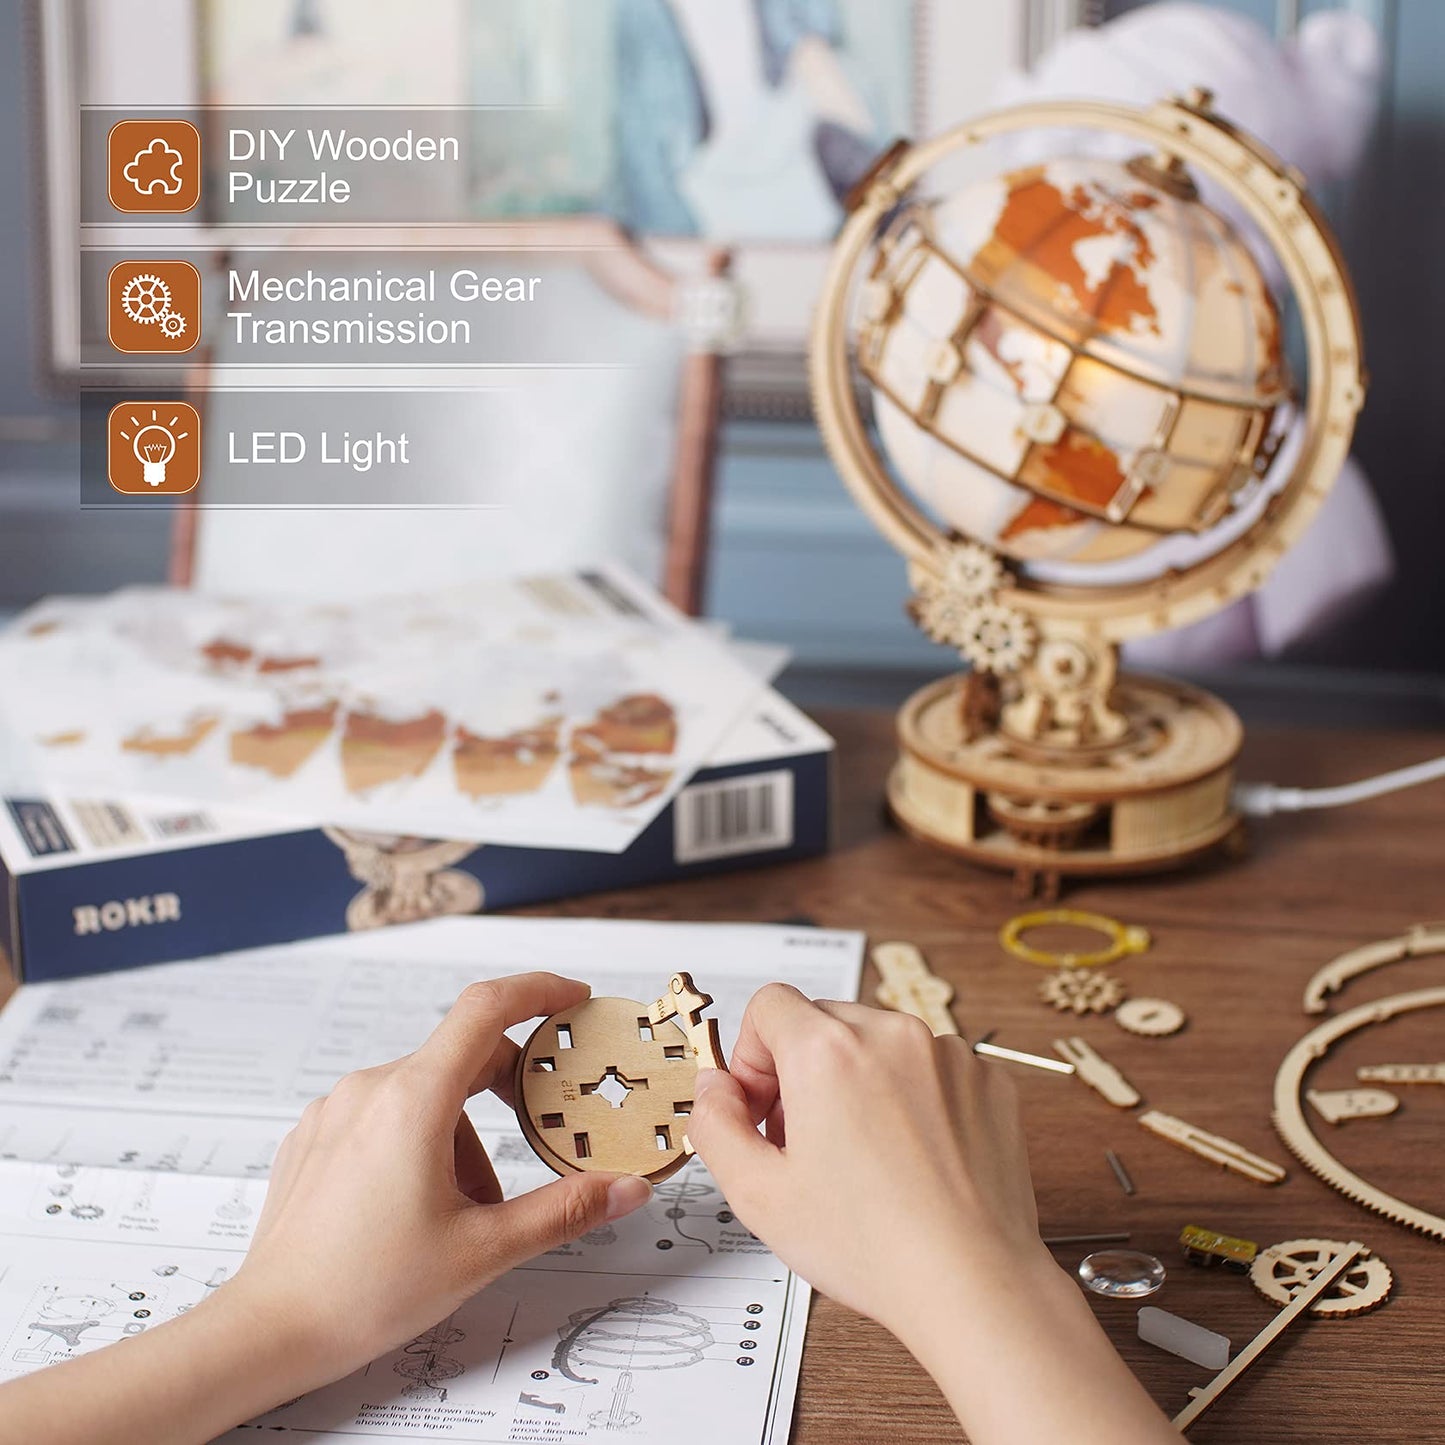 ROKR 3D Wooden Puzzles for Adults Illuminated Globe with Stand 180pcs 3D Puzzles Built-in LED Model Kit Hobby Gifts for Adults/Teens Home Decor